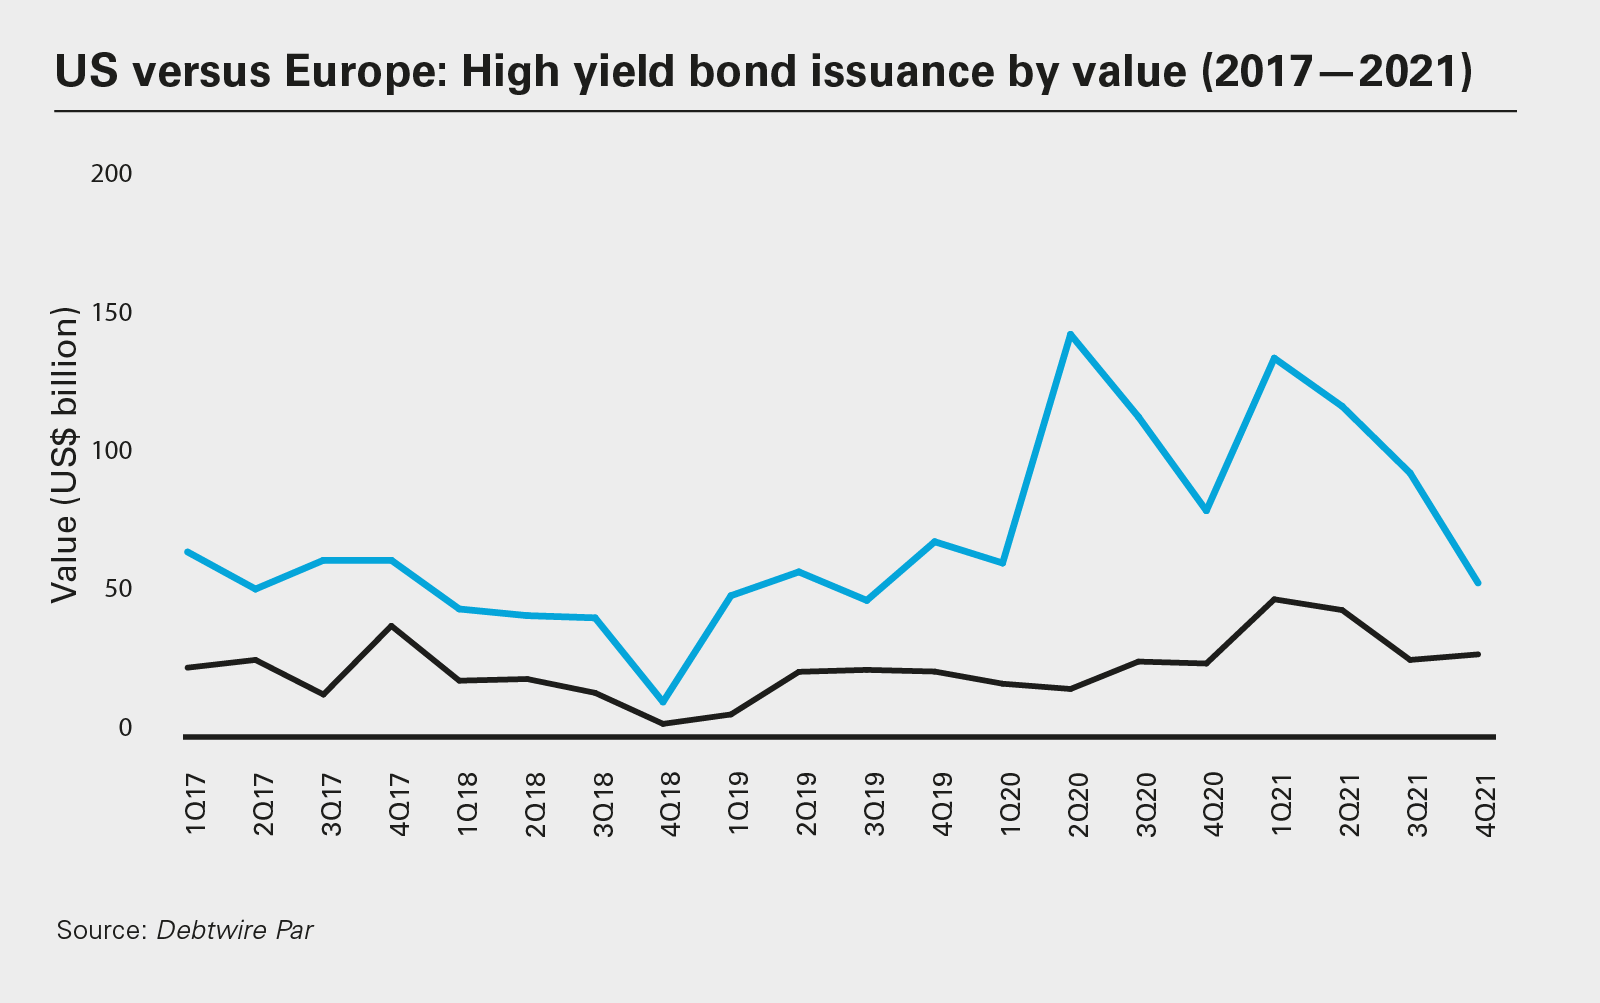 US versus Europe: High yield bond issuance by value (2017—2021)